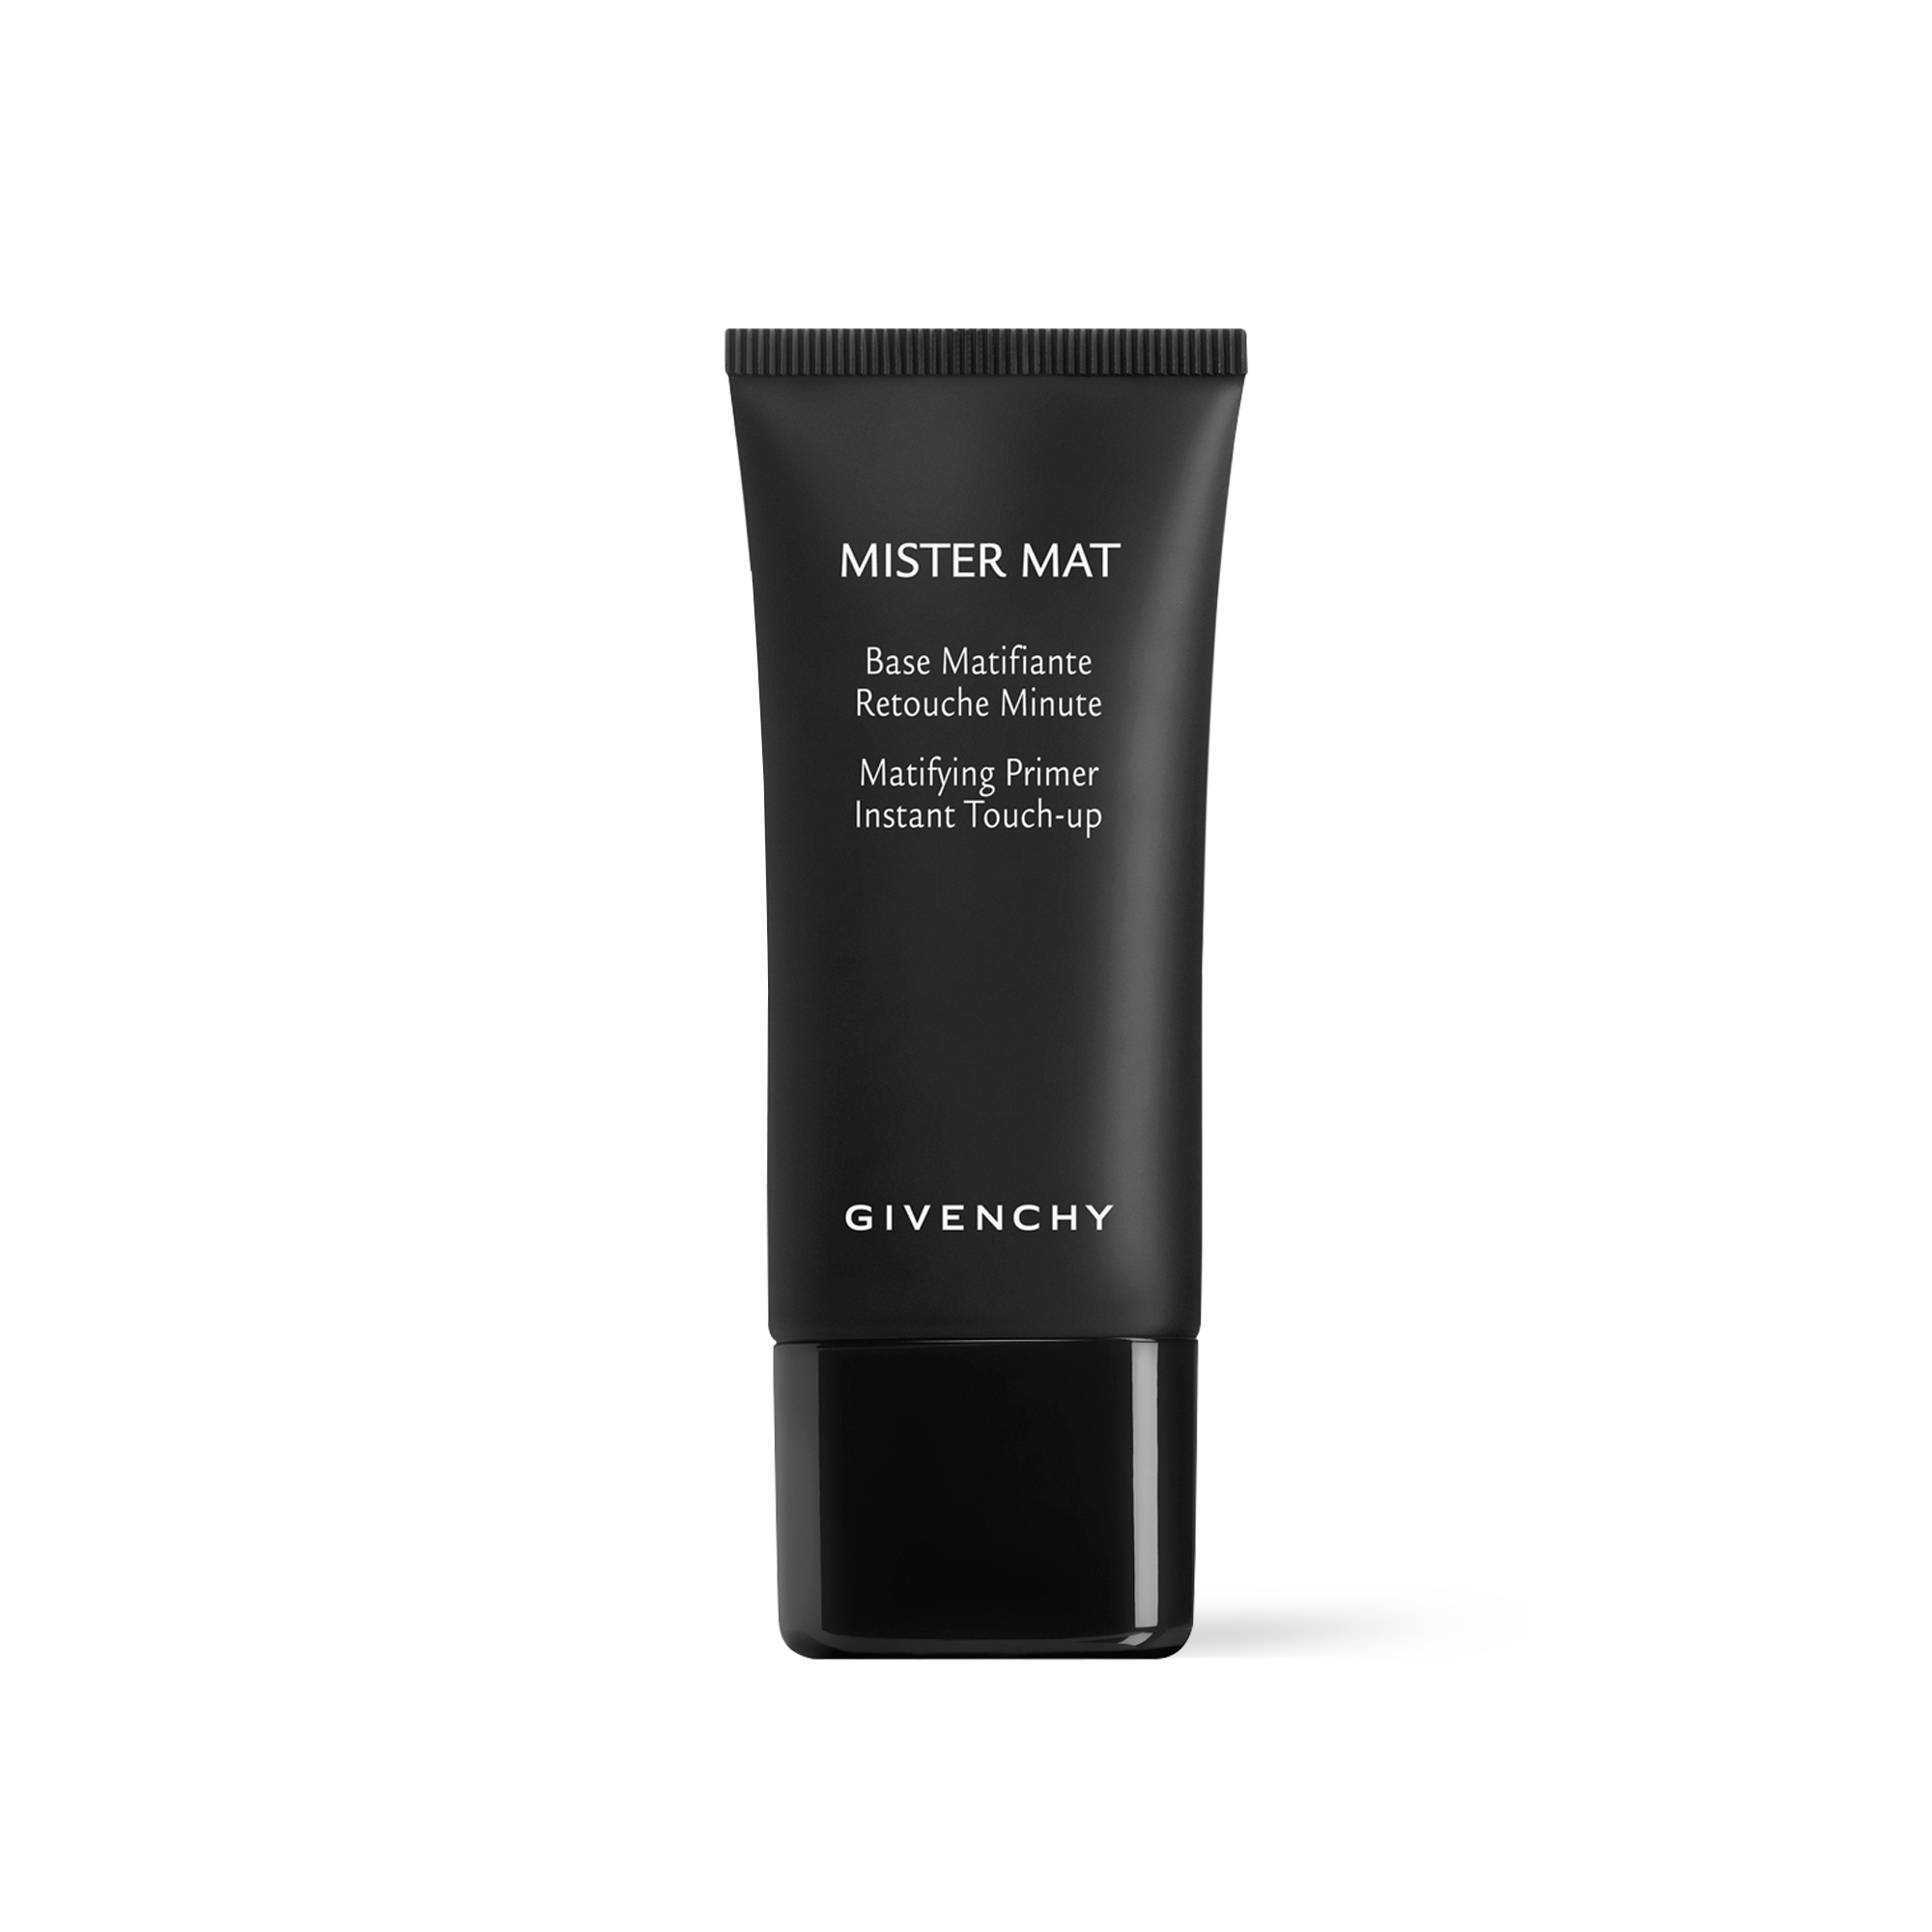 givenchy mister smooth